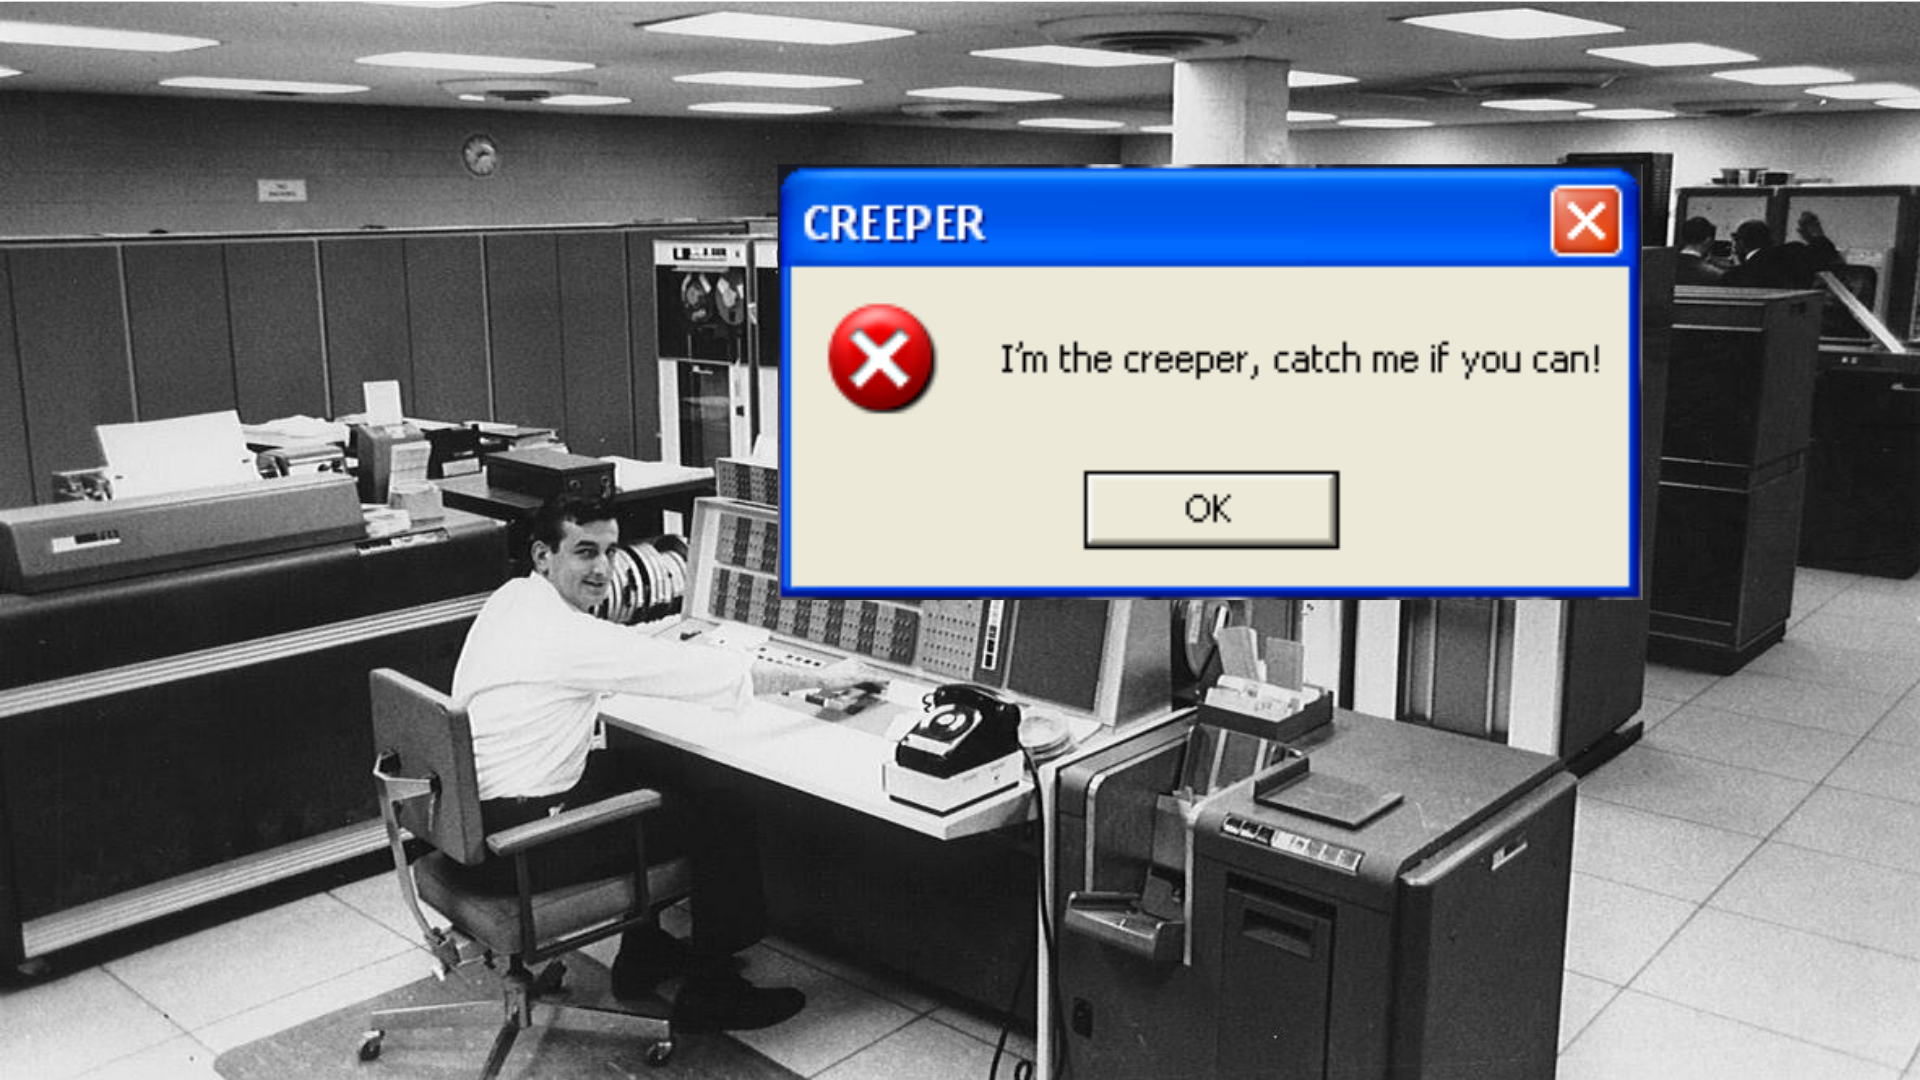 The creeper jumped on the users' computers with an alert message.